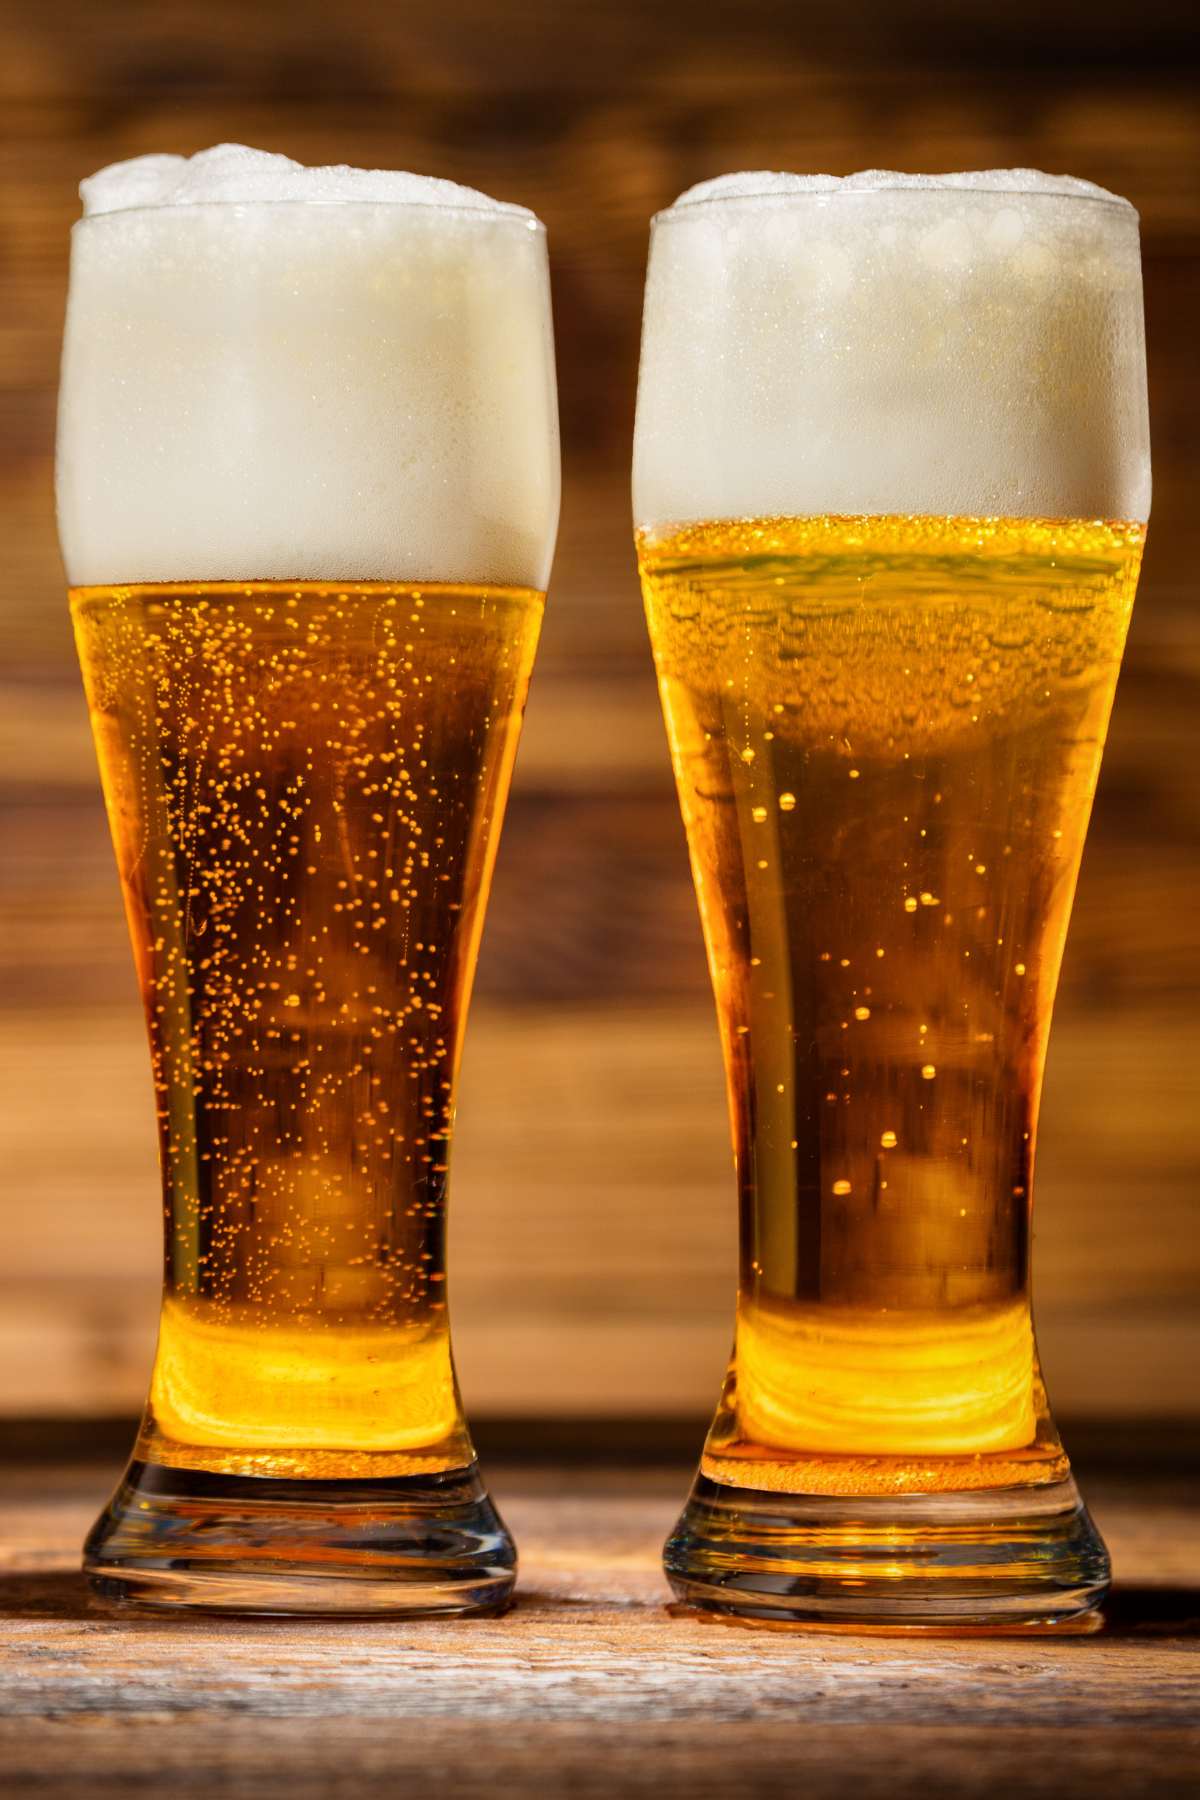 Both Coors Light and Bud Light belong to the light beer category, a segment that gained popularity due to its lower calorie and carbohydrate content compared to regular beers. These beers are often chosen by individuals who are looking to enjoy a cold one without the guilt of consuming excessive calories. Let's take a closer look at each of these beers.